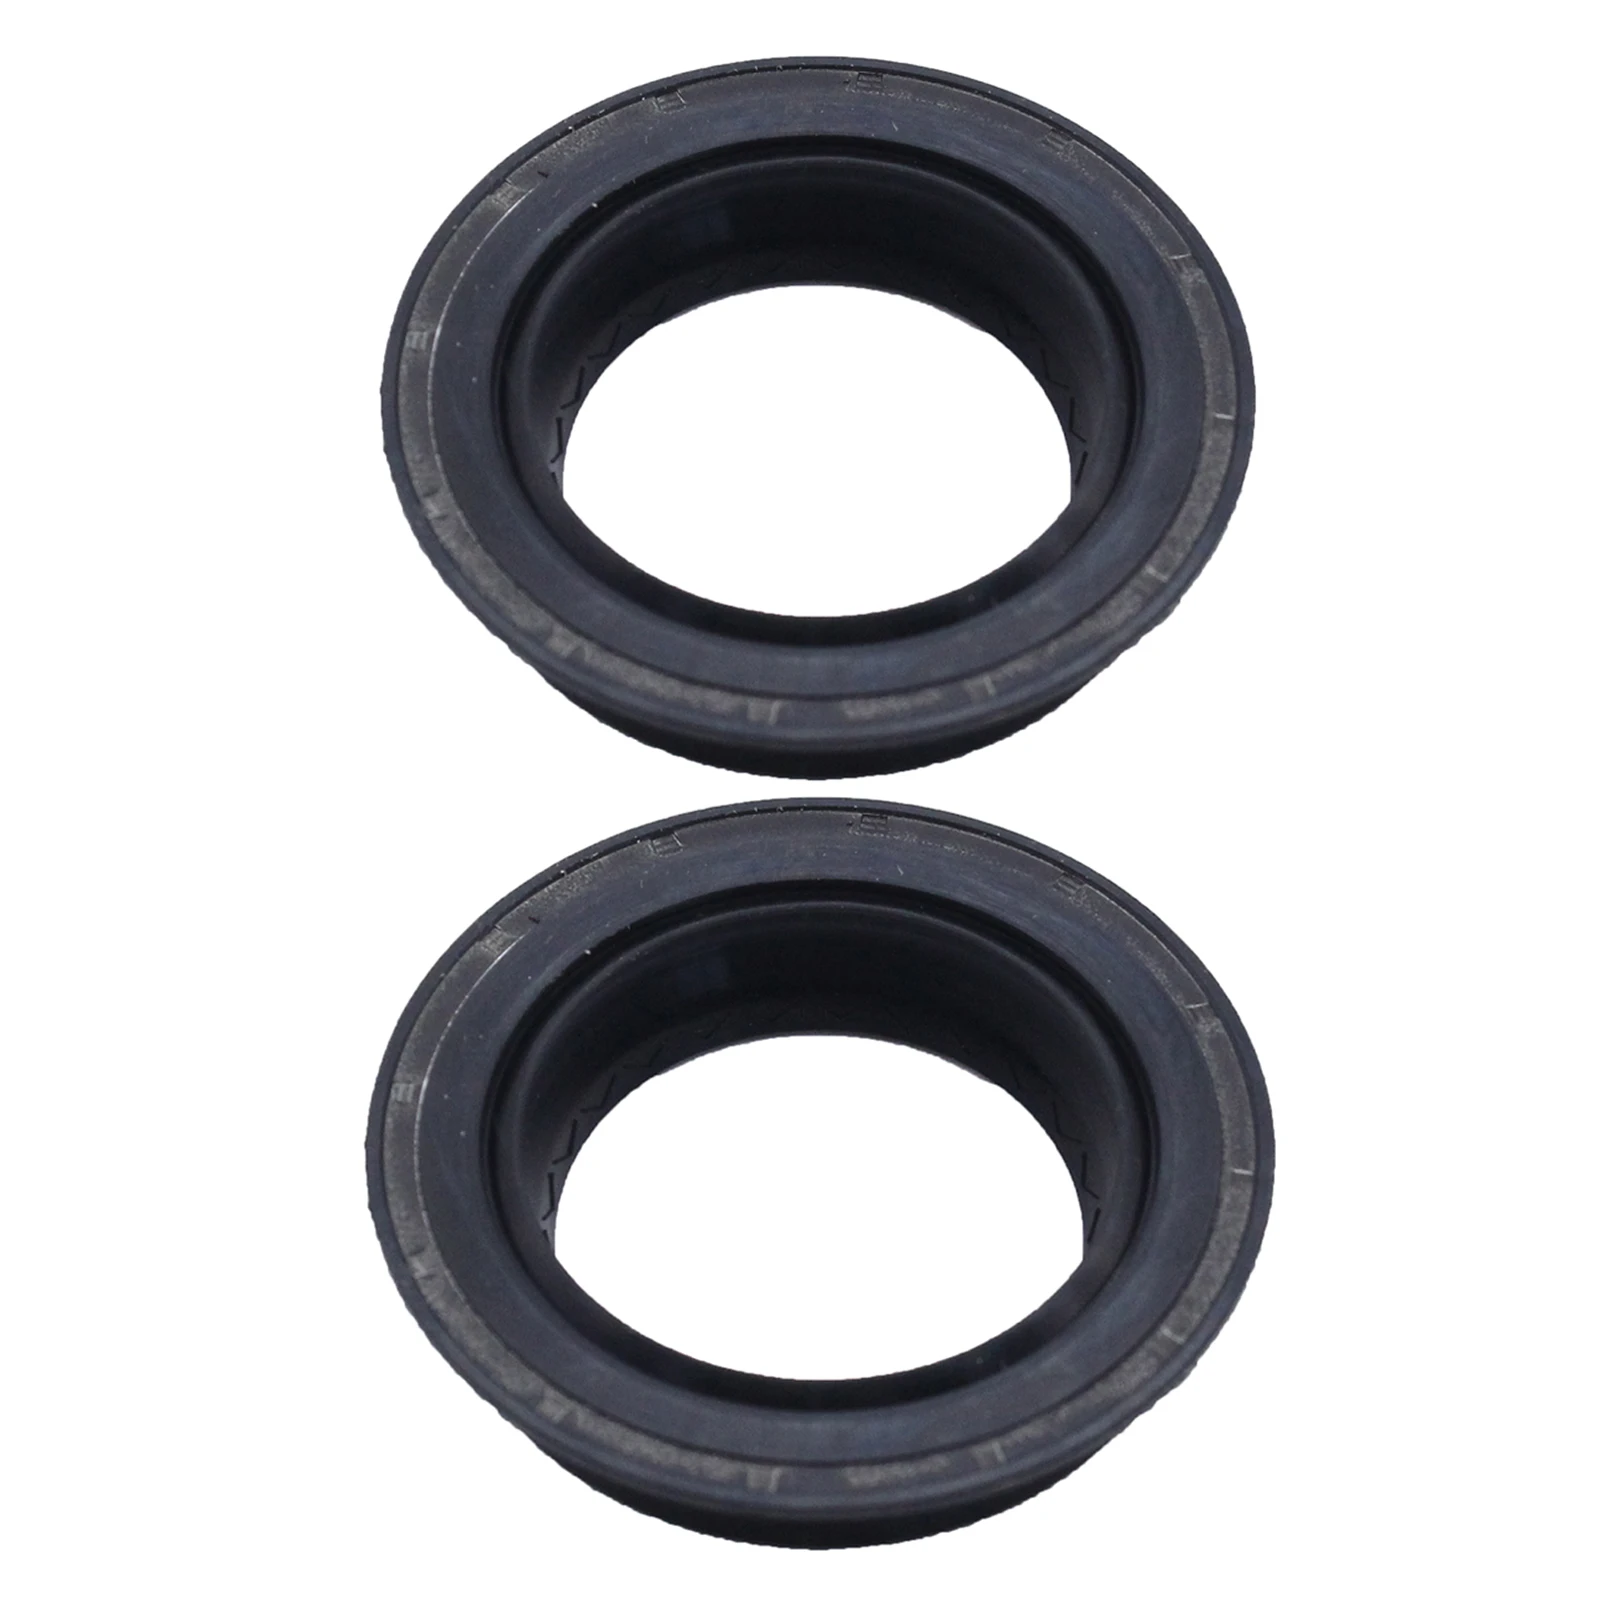 Set of 2 303752-KIT Front Axle Seal Oil Seal Kit Vehicle Interior Mount Kit Moulding Accessories Supplies Fit for Patrol Y60 Y61